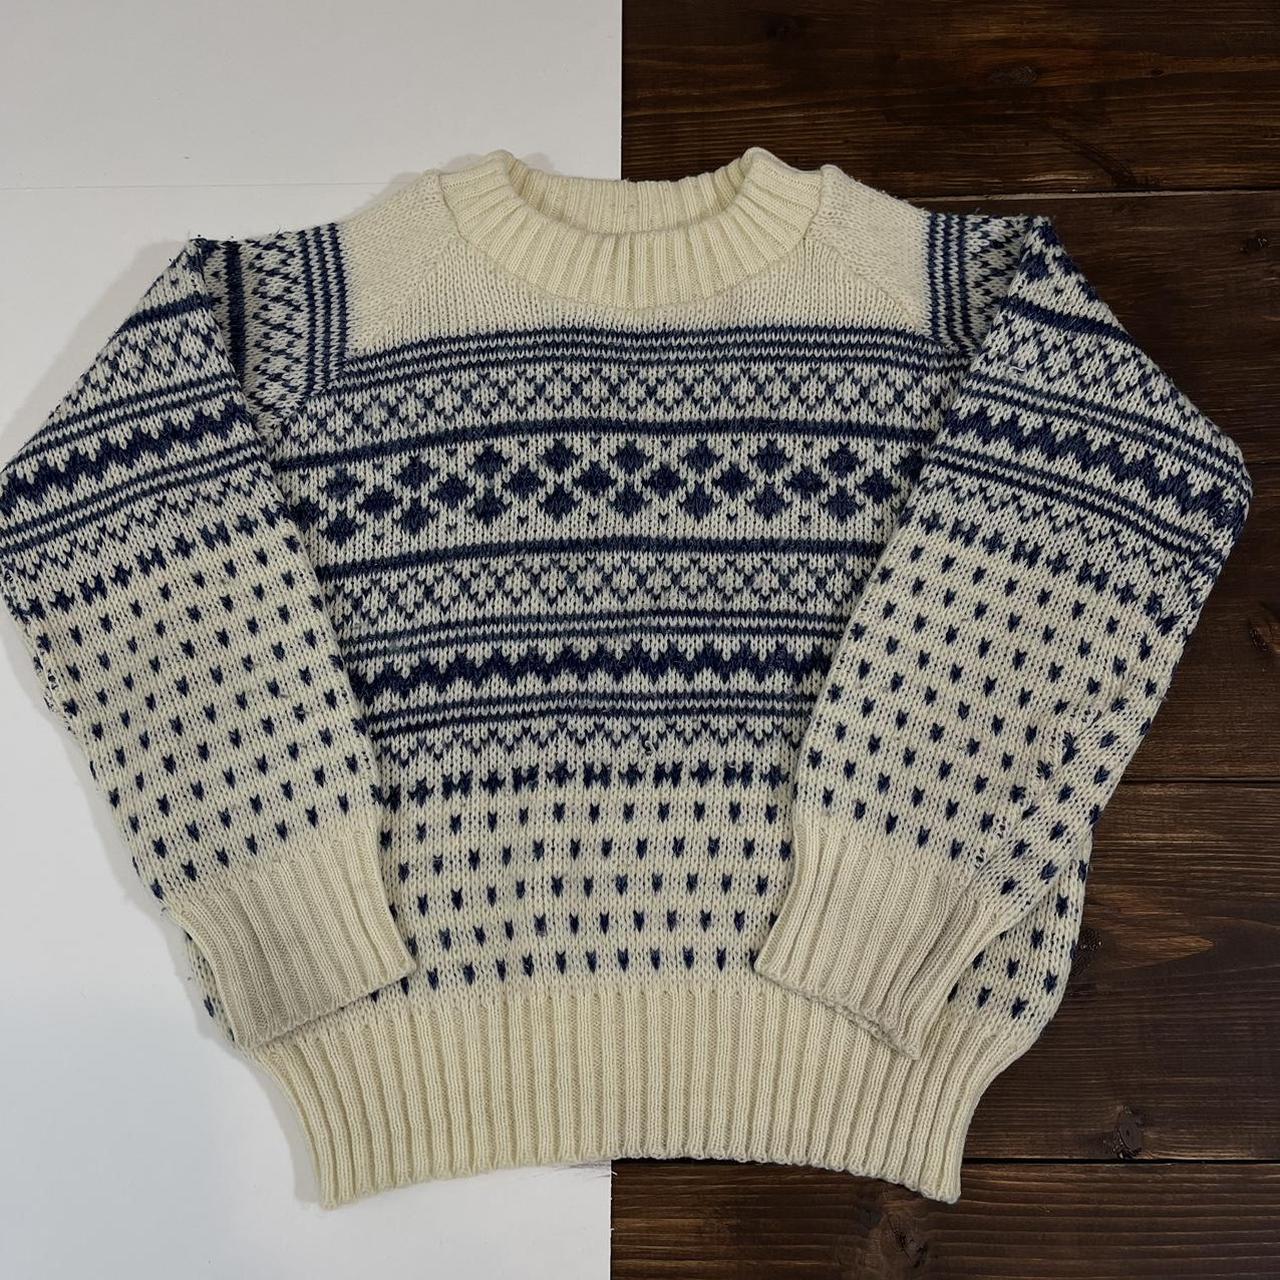 Vintage Knit Sweater Some stains Please see... - Depop